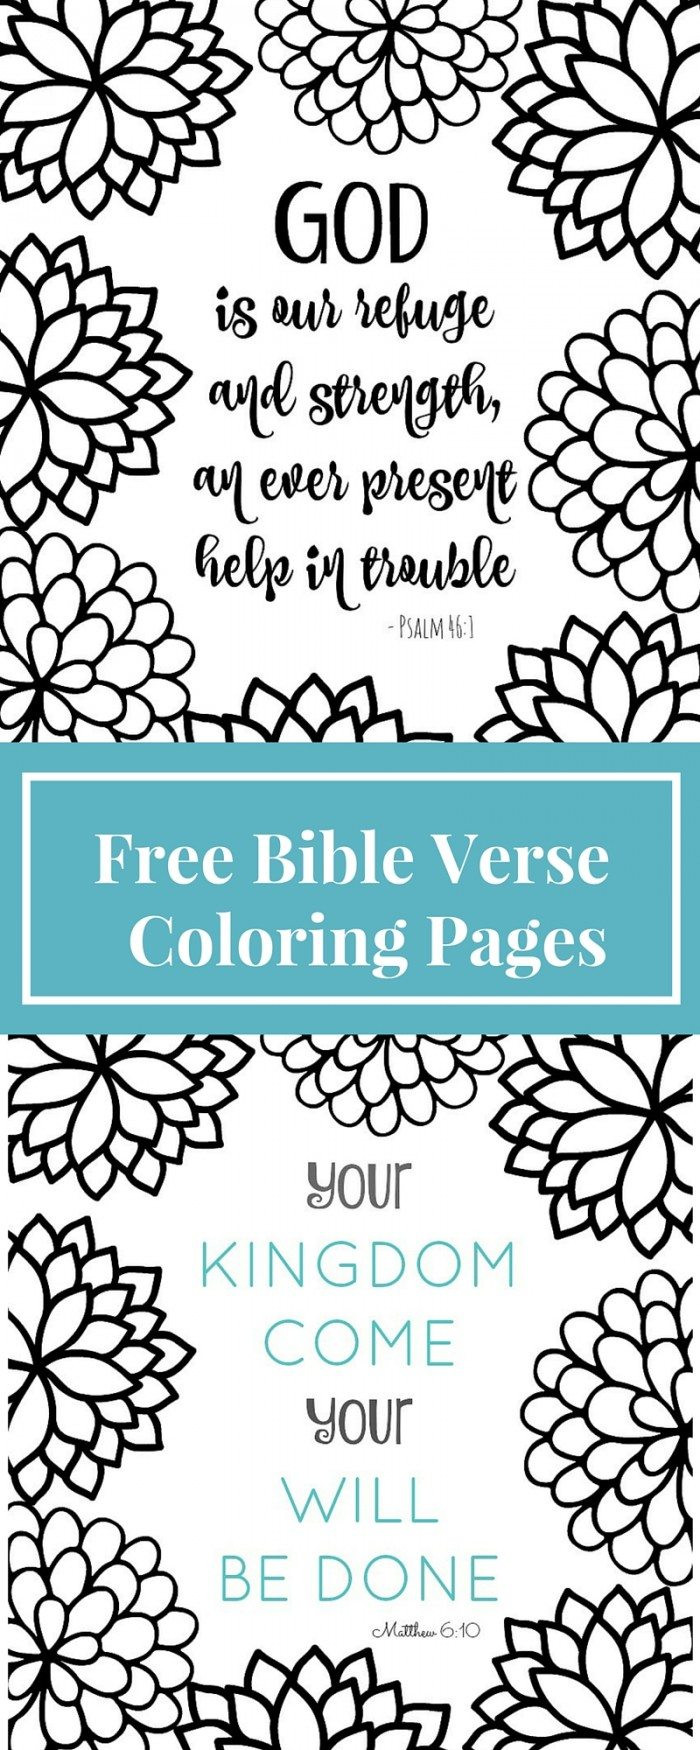 Printable Bible Verse Coloring Pages
 FREE Bible Verse Coloring Pages